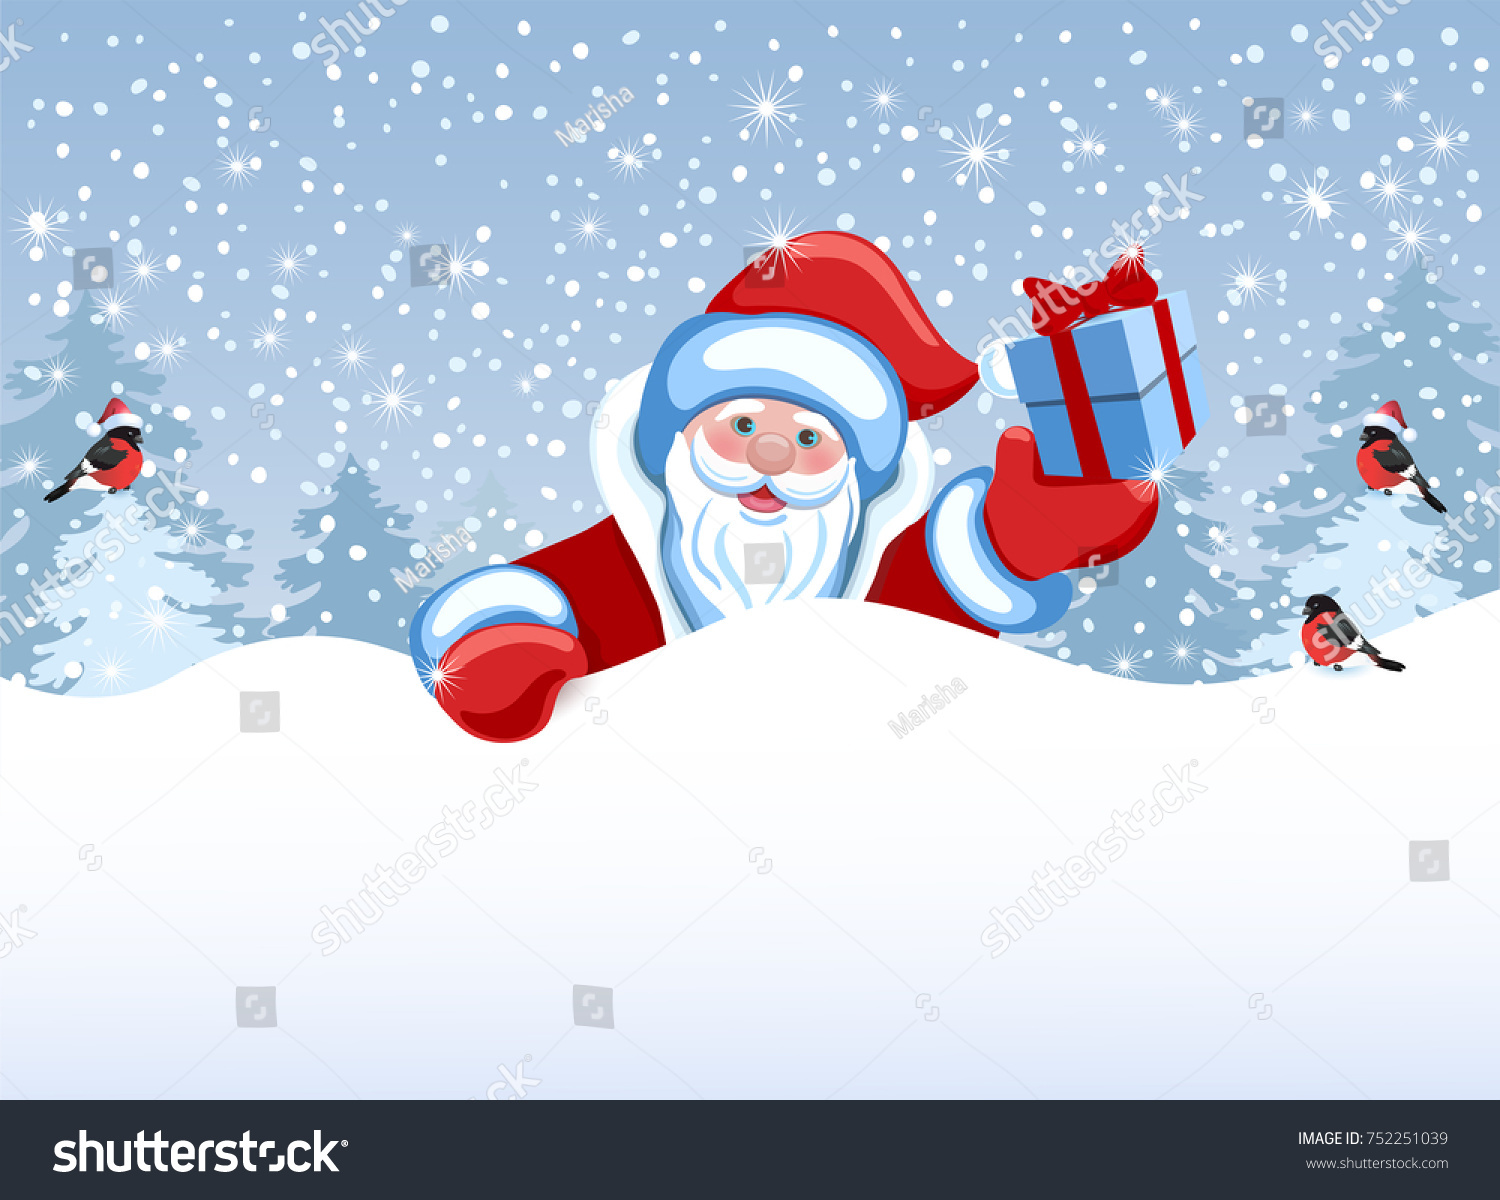 Santa Claus holds poster in the form of a snowdrift for advertise discounts, sales or an invitation to celebrate Christmas. Design of the New Year presentation. #752251039